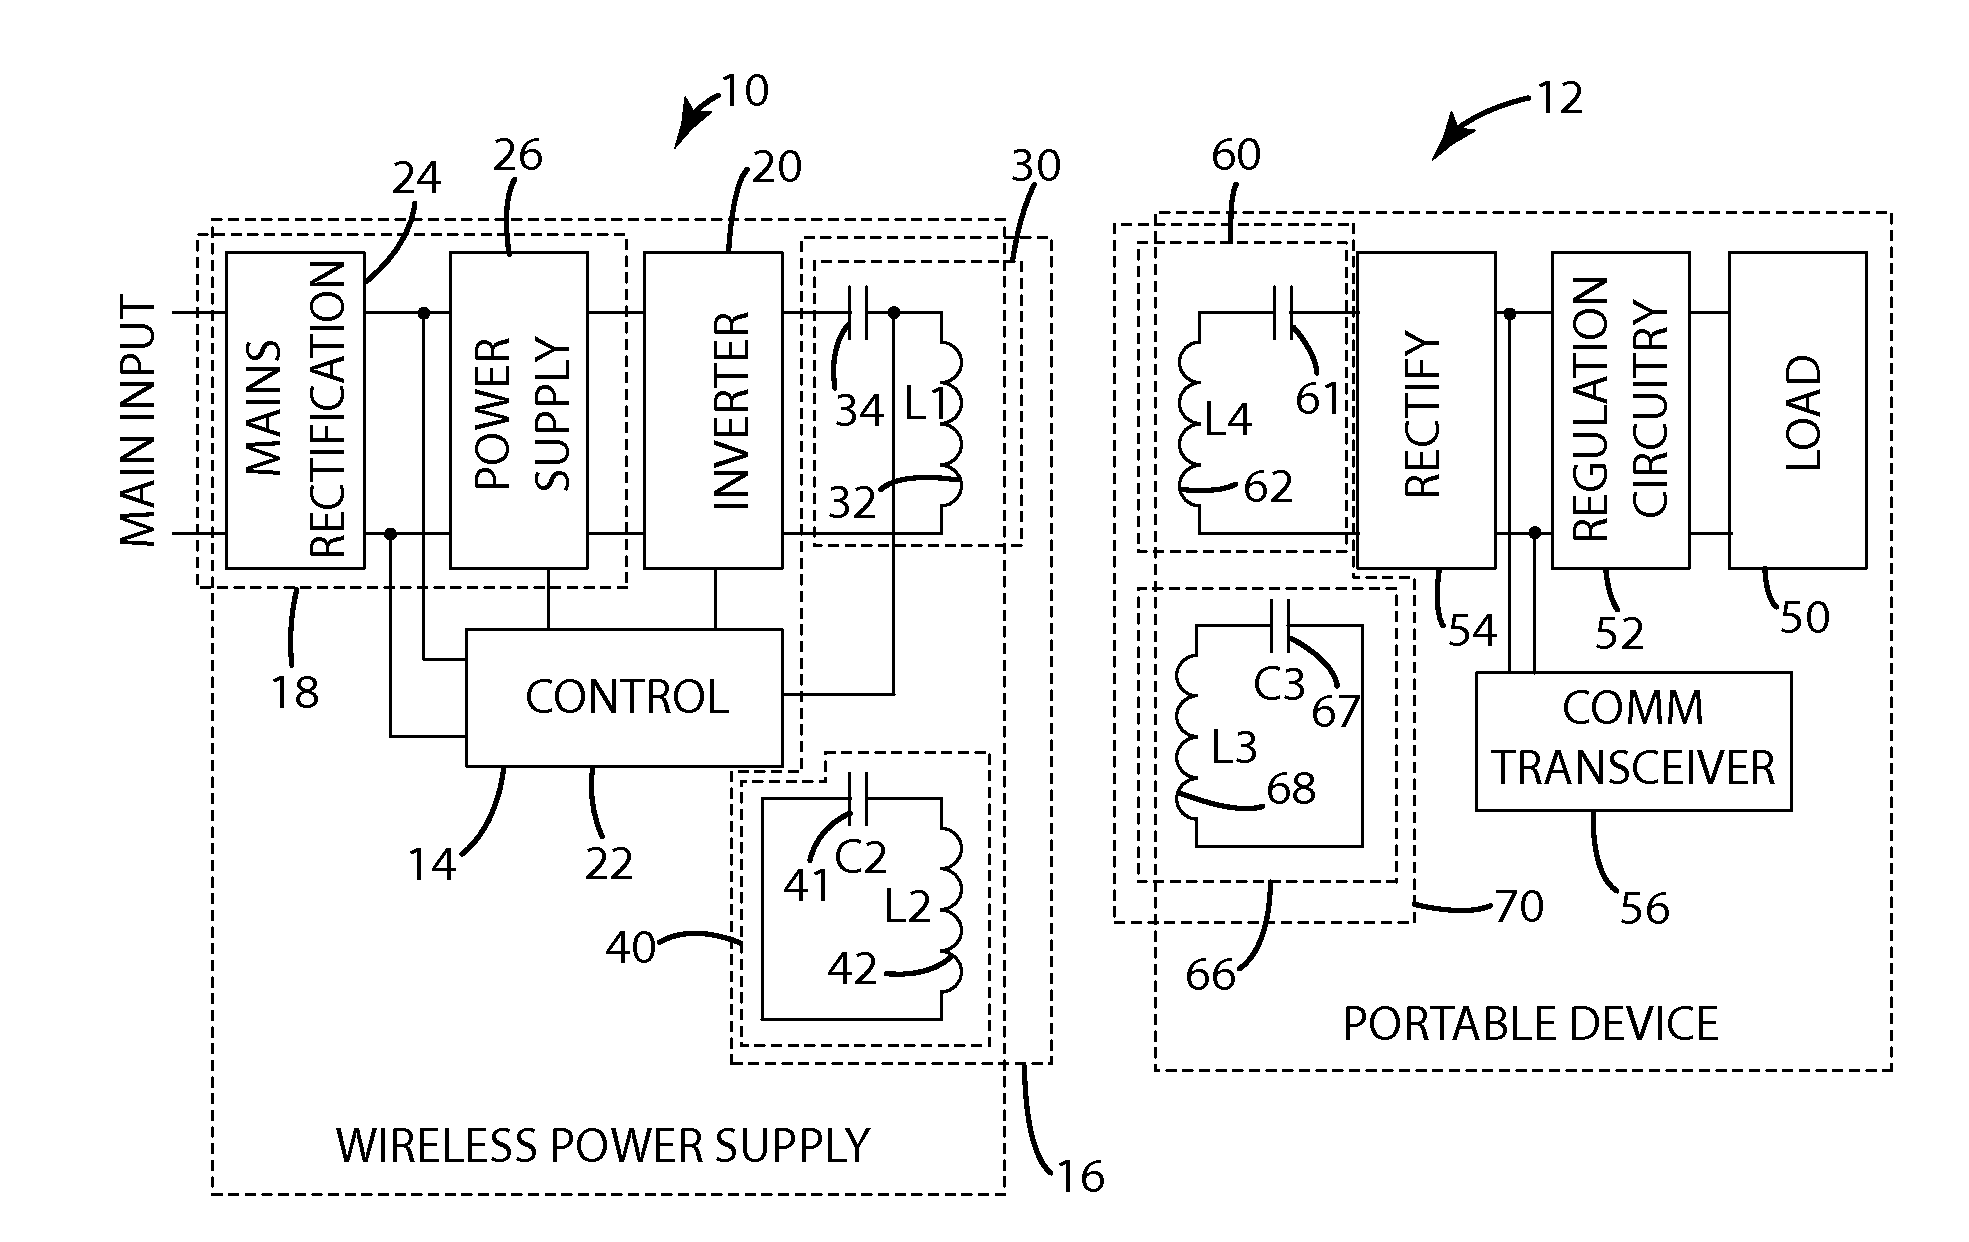 System and method for communication in wireless power supply systems